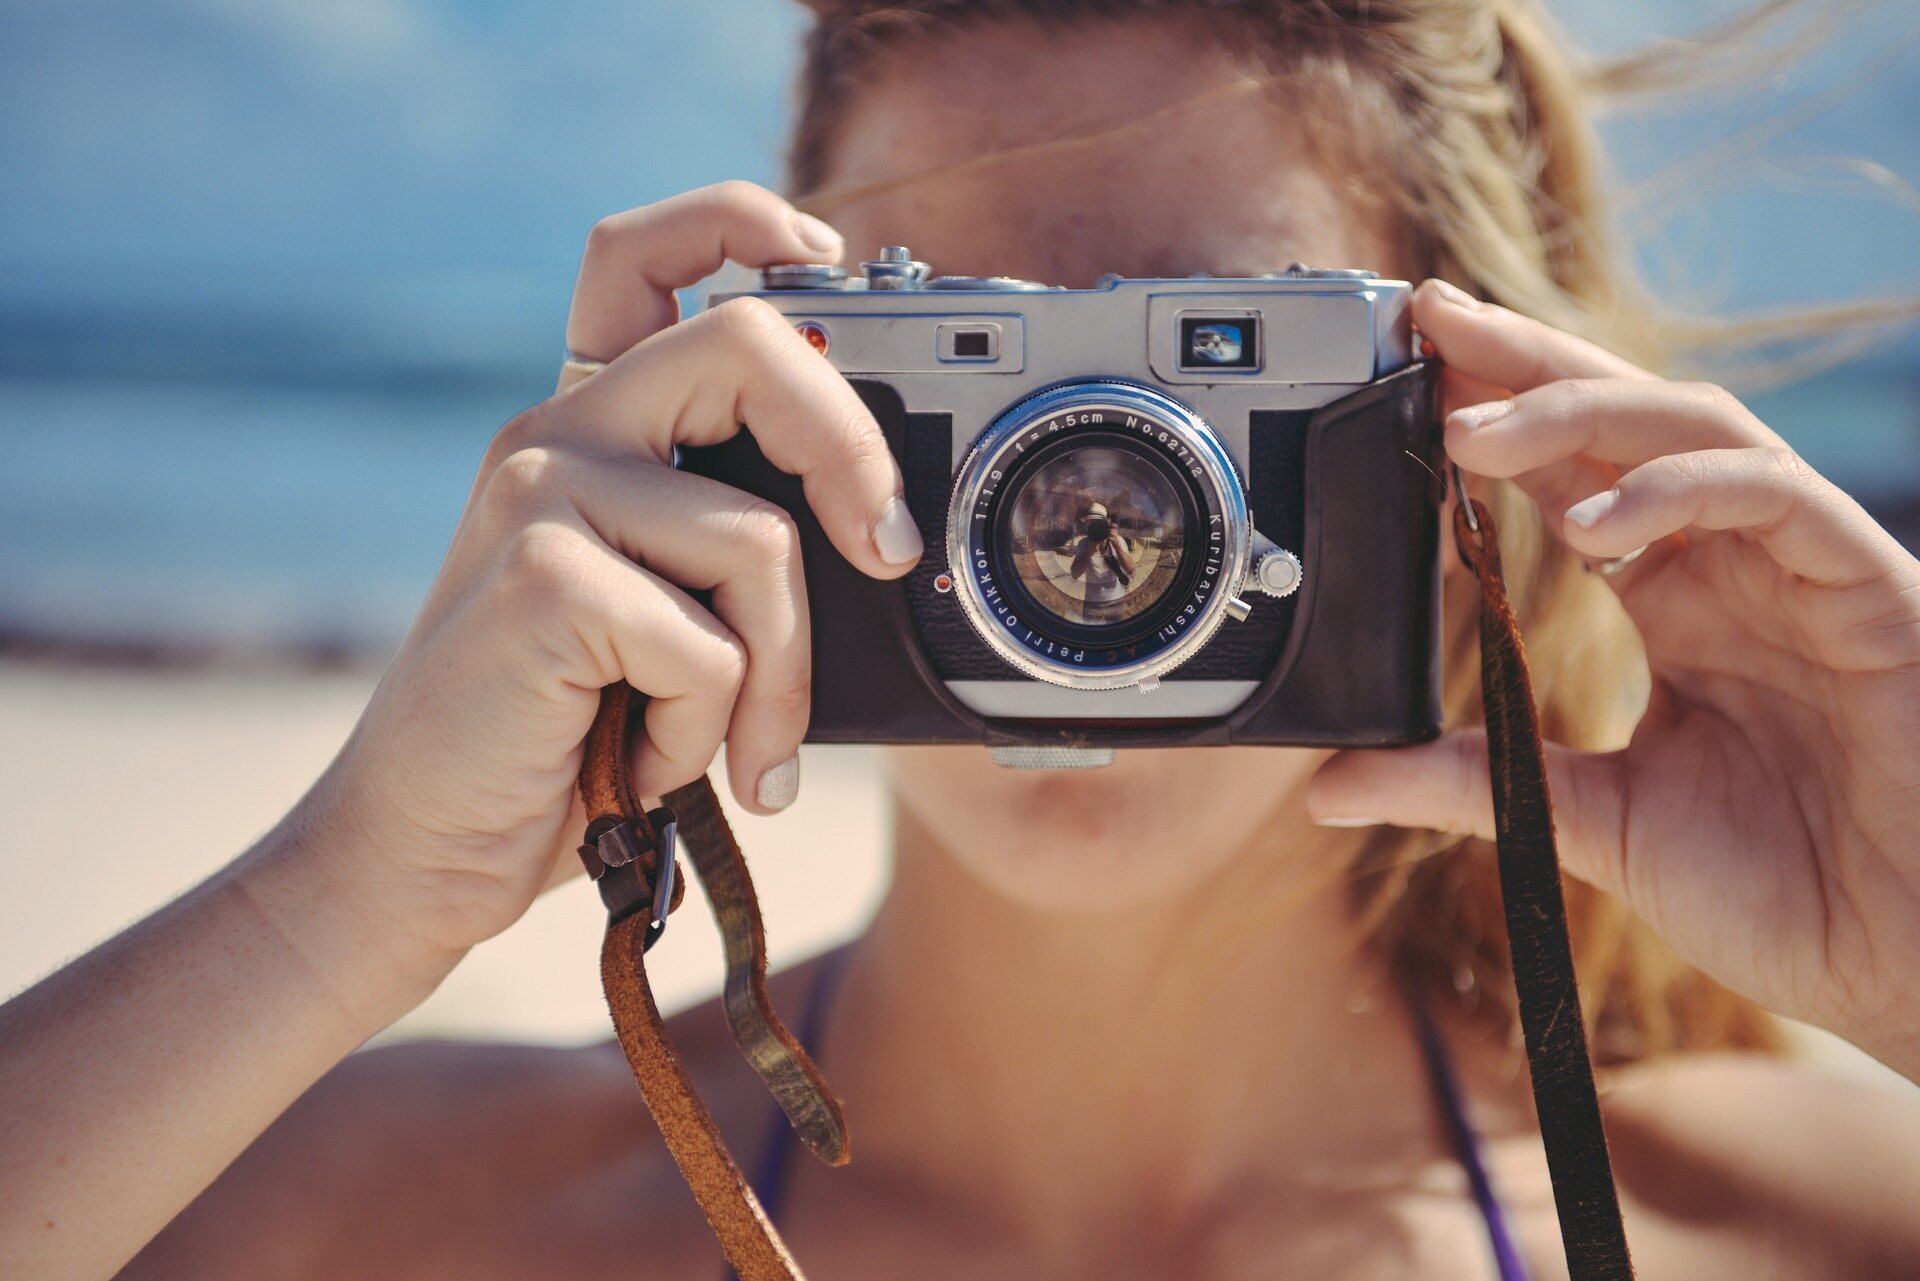 Girl holding up a camera at the beach